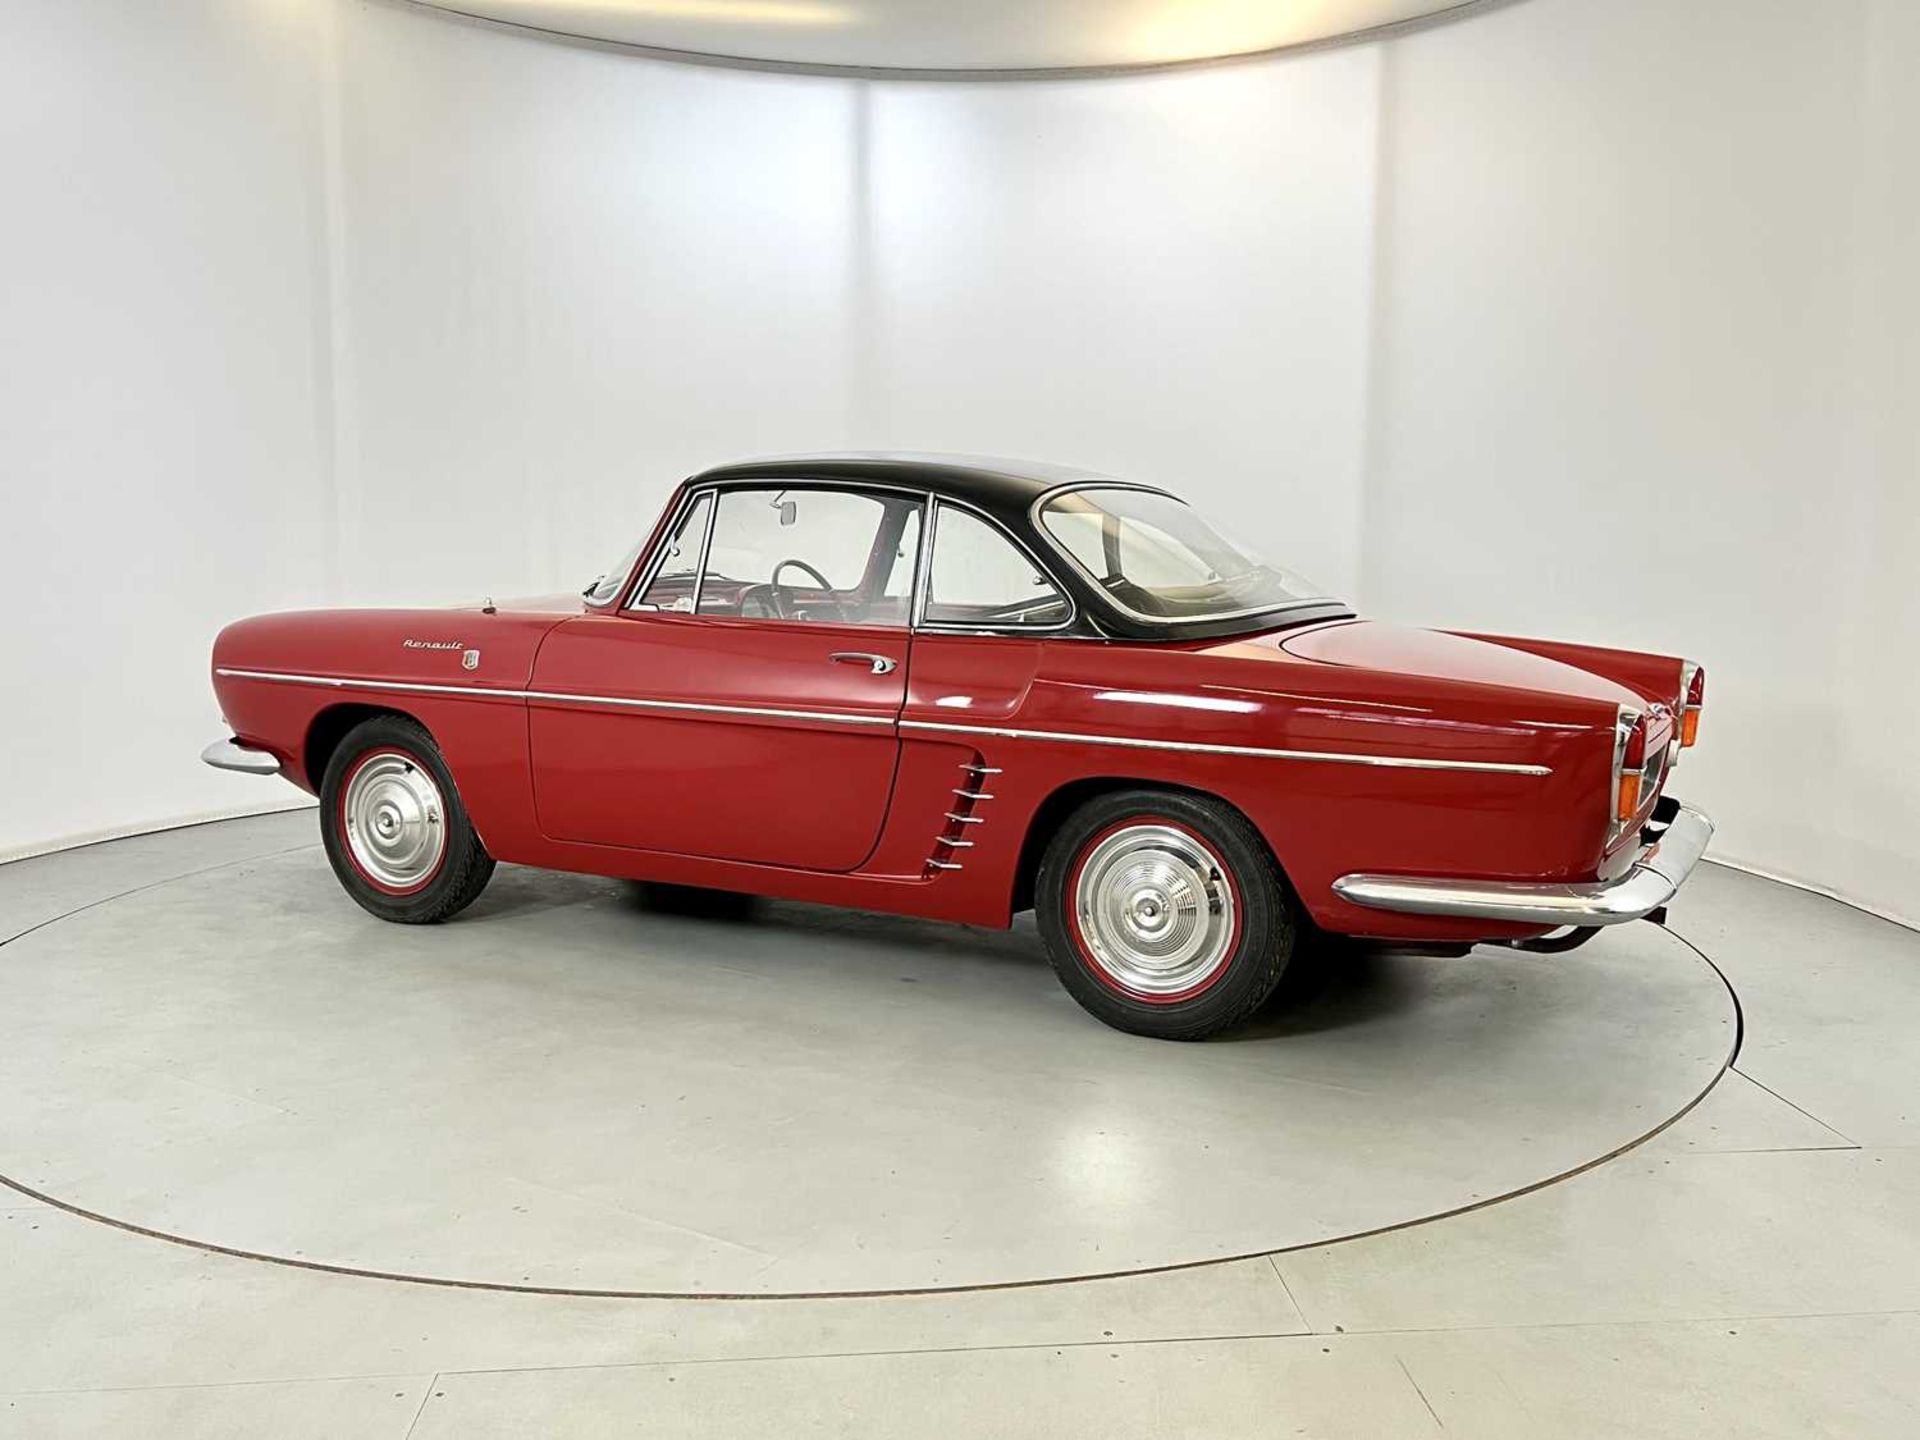 1962 Renault Floride Convertible - Image 6 of 43